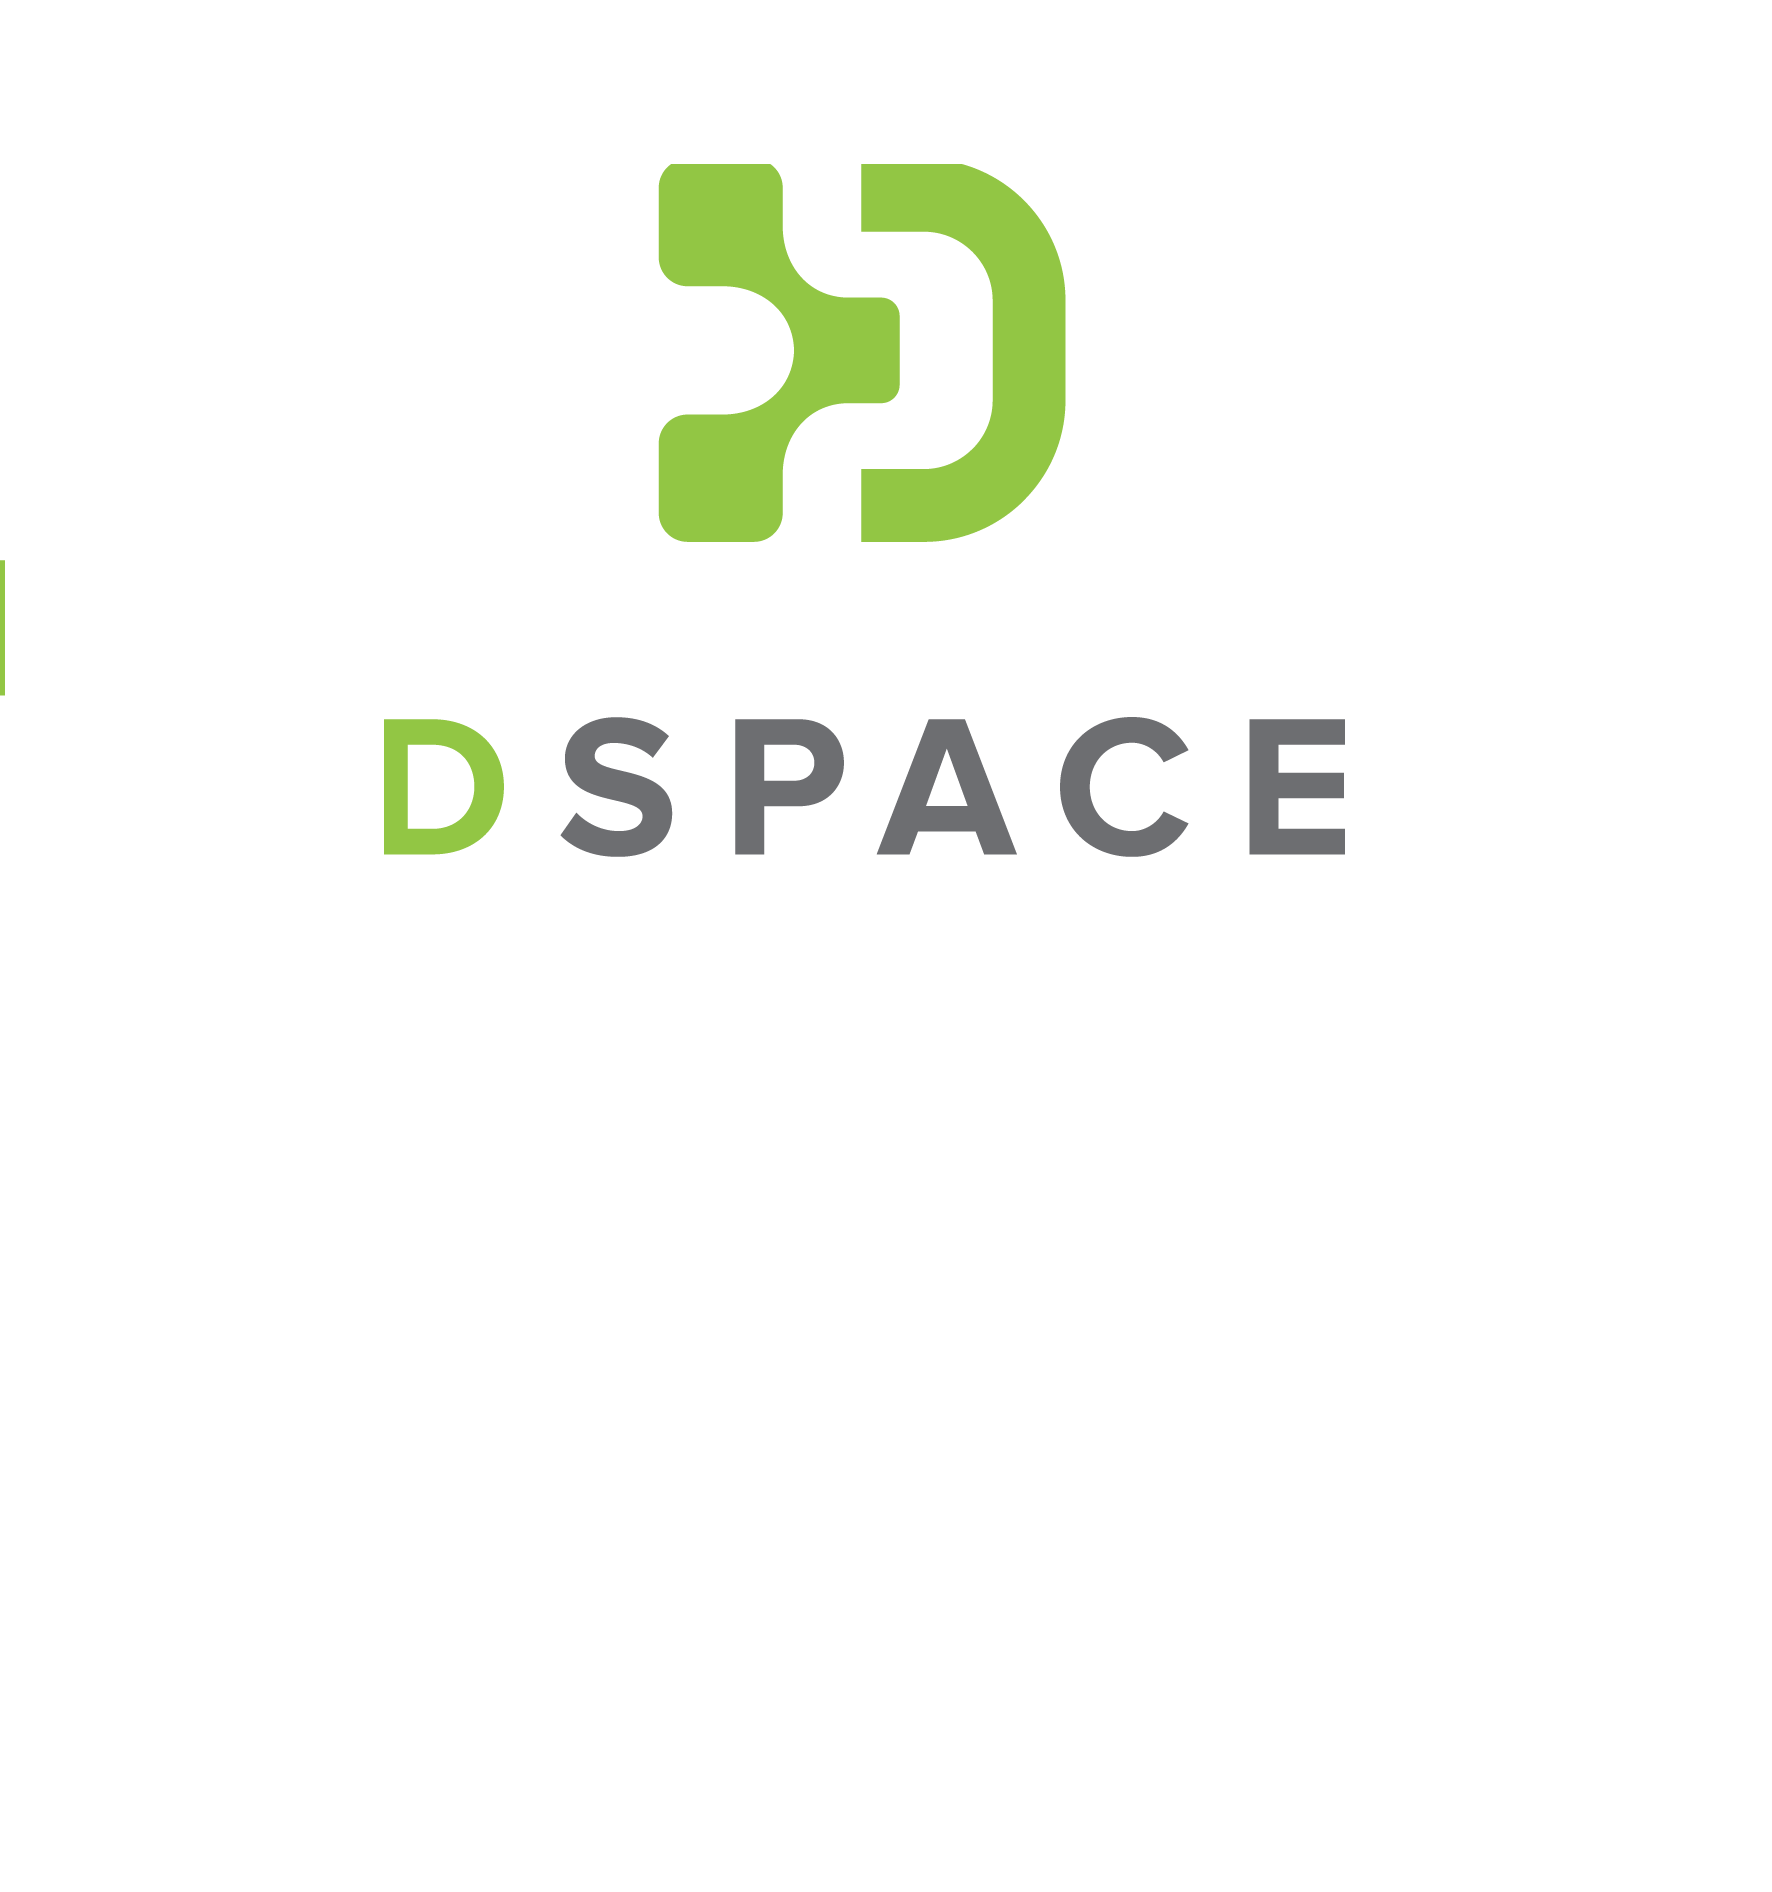 Manual for Dspace Using